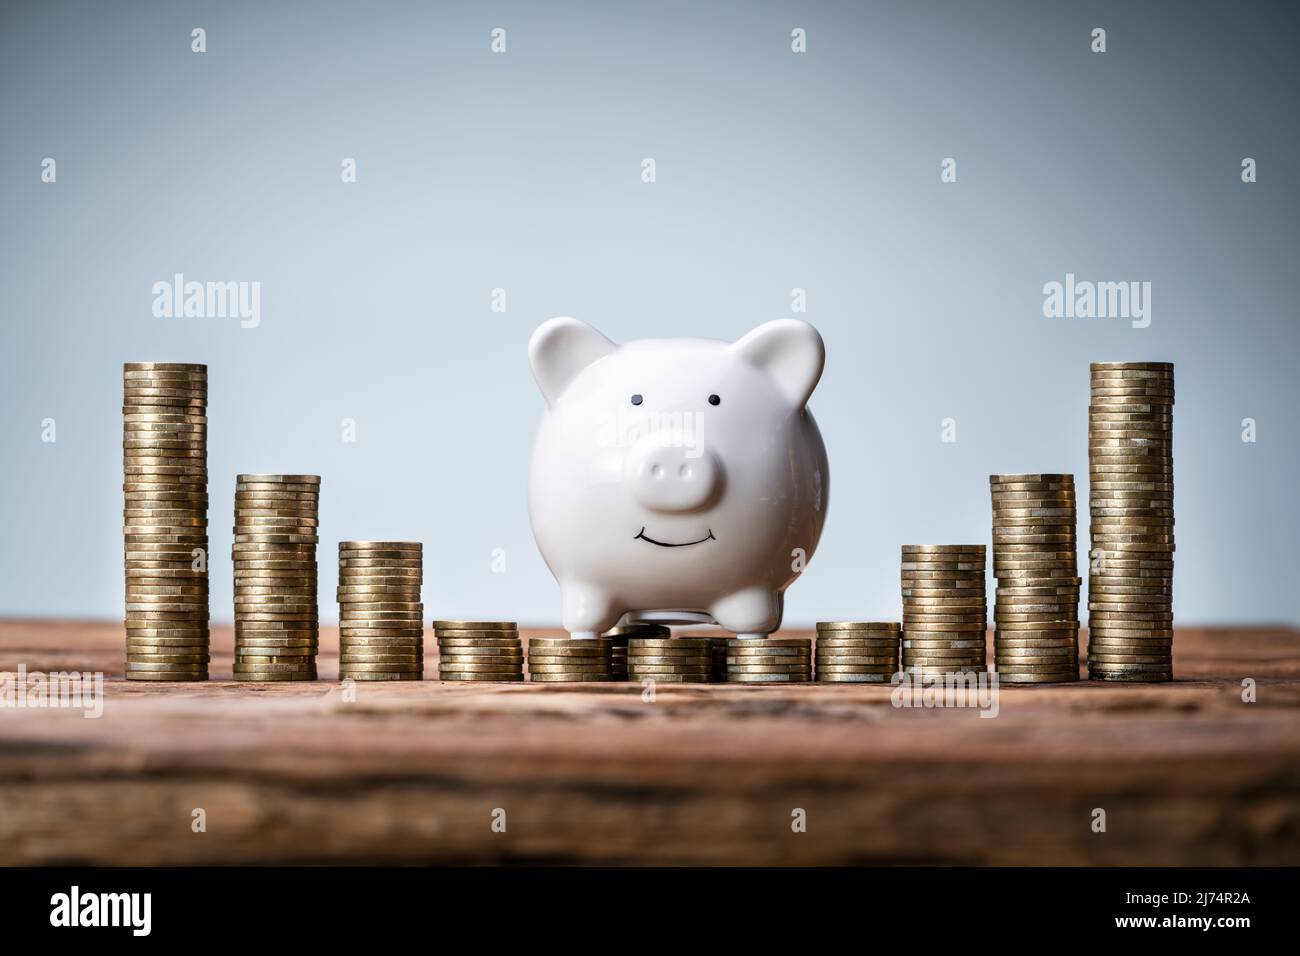 Piggybank Money Support And Financial Tax Concept Stock Photo